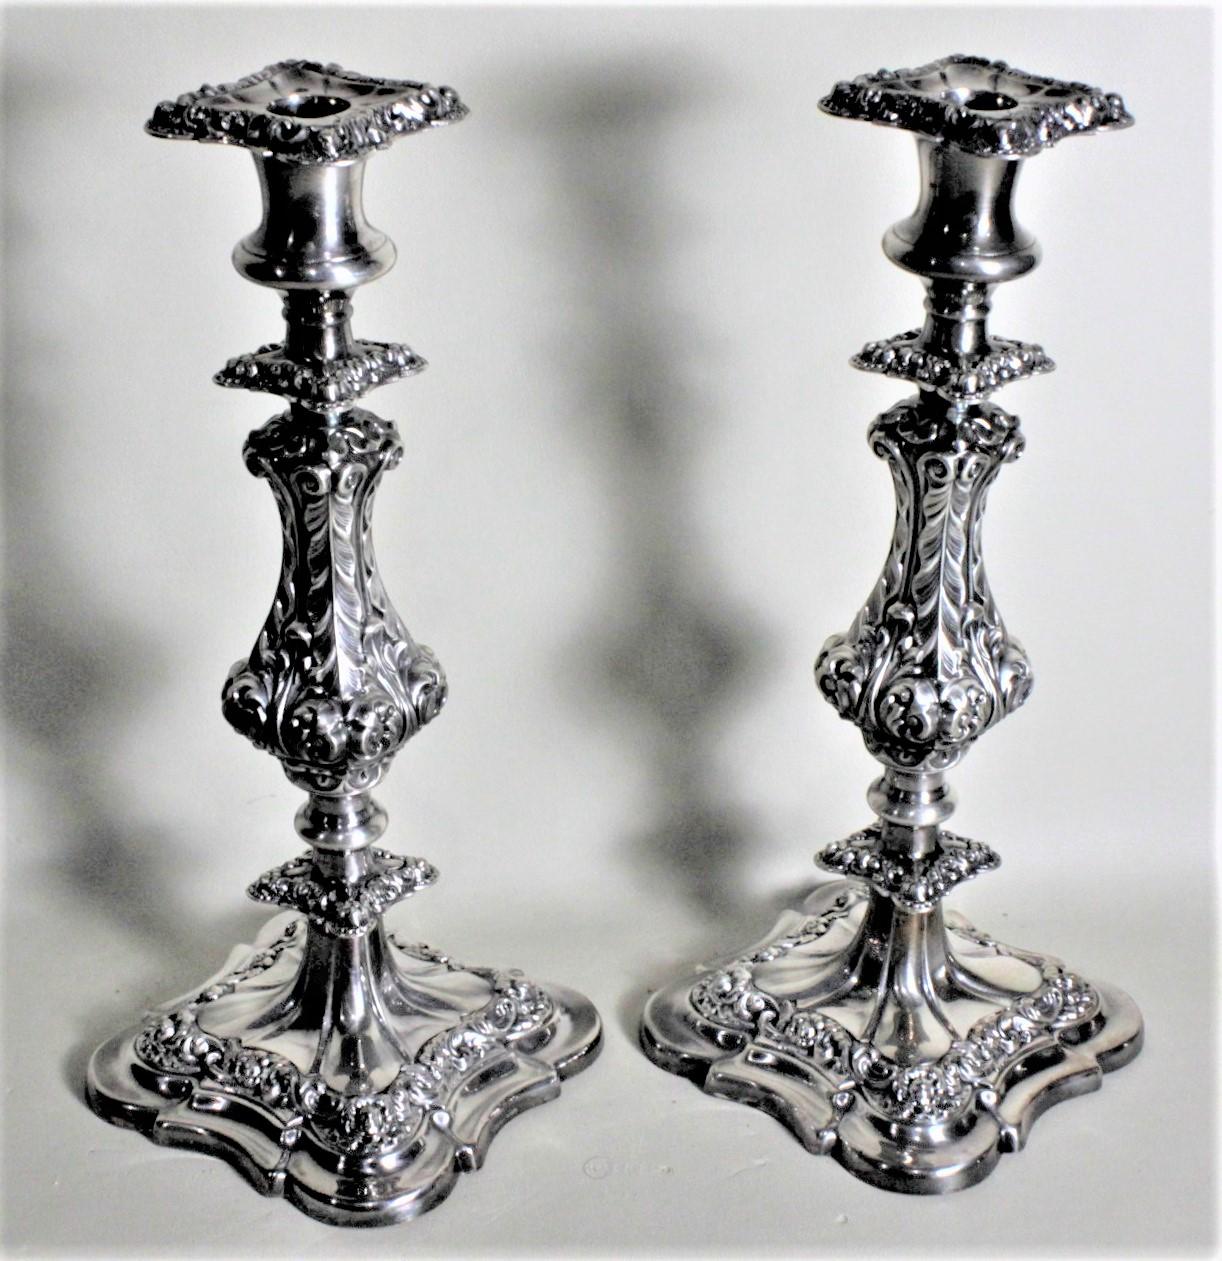 silver plated candlesticks made in england